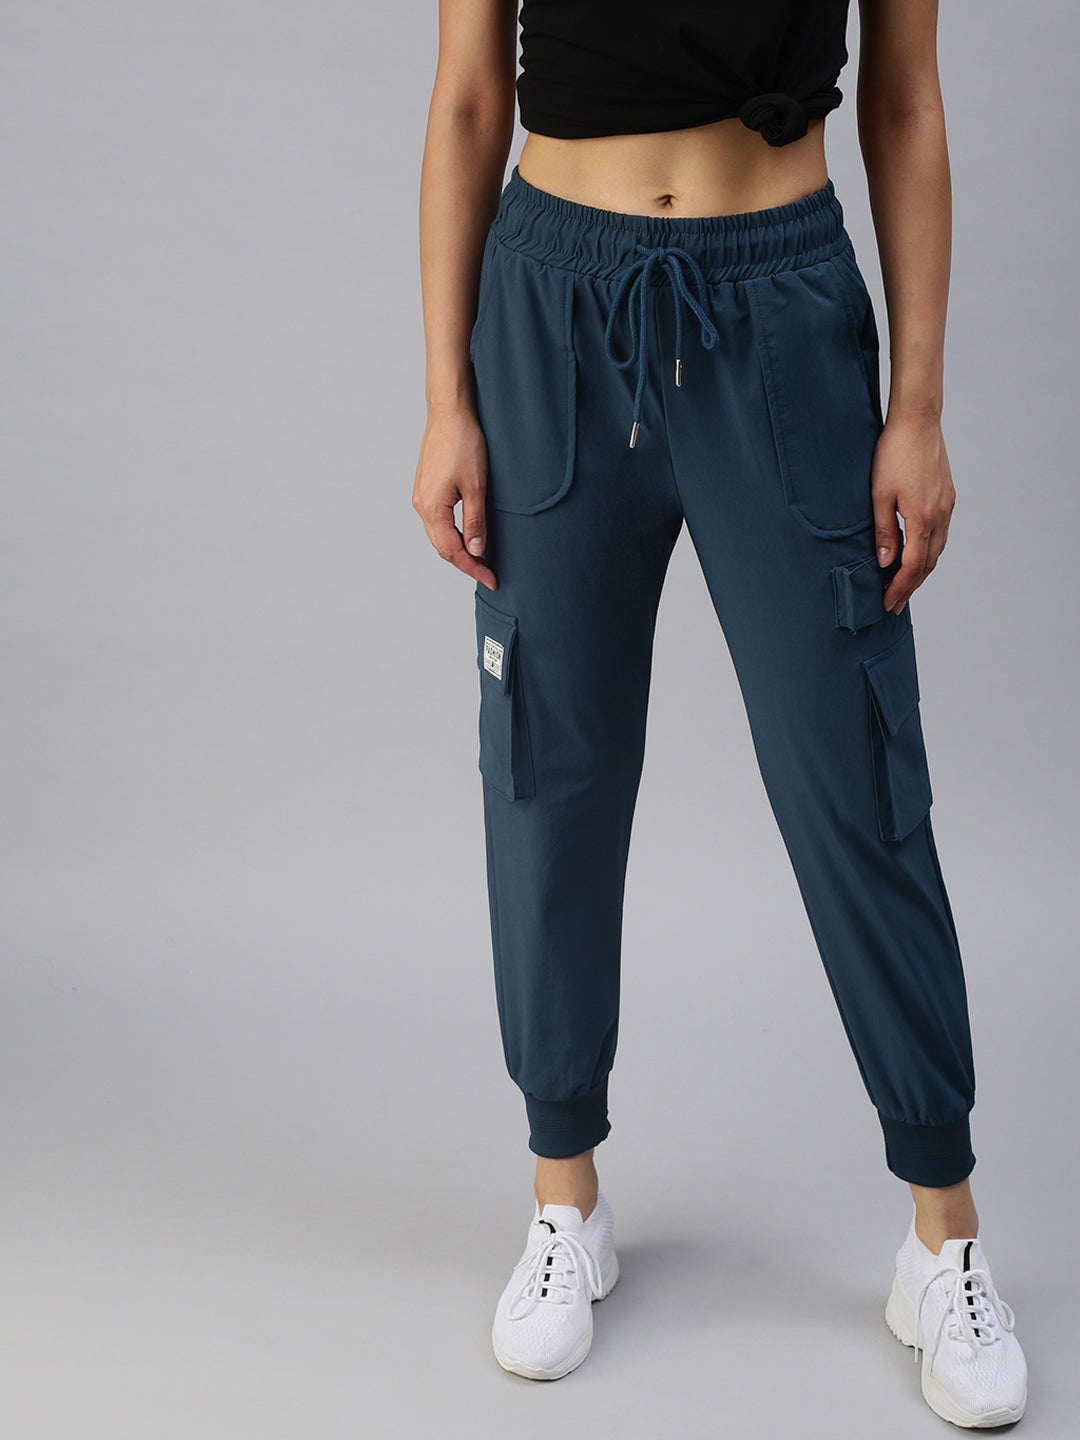 Women's Teal Solid Joggers Track Pant